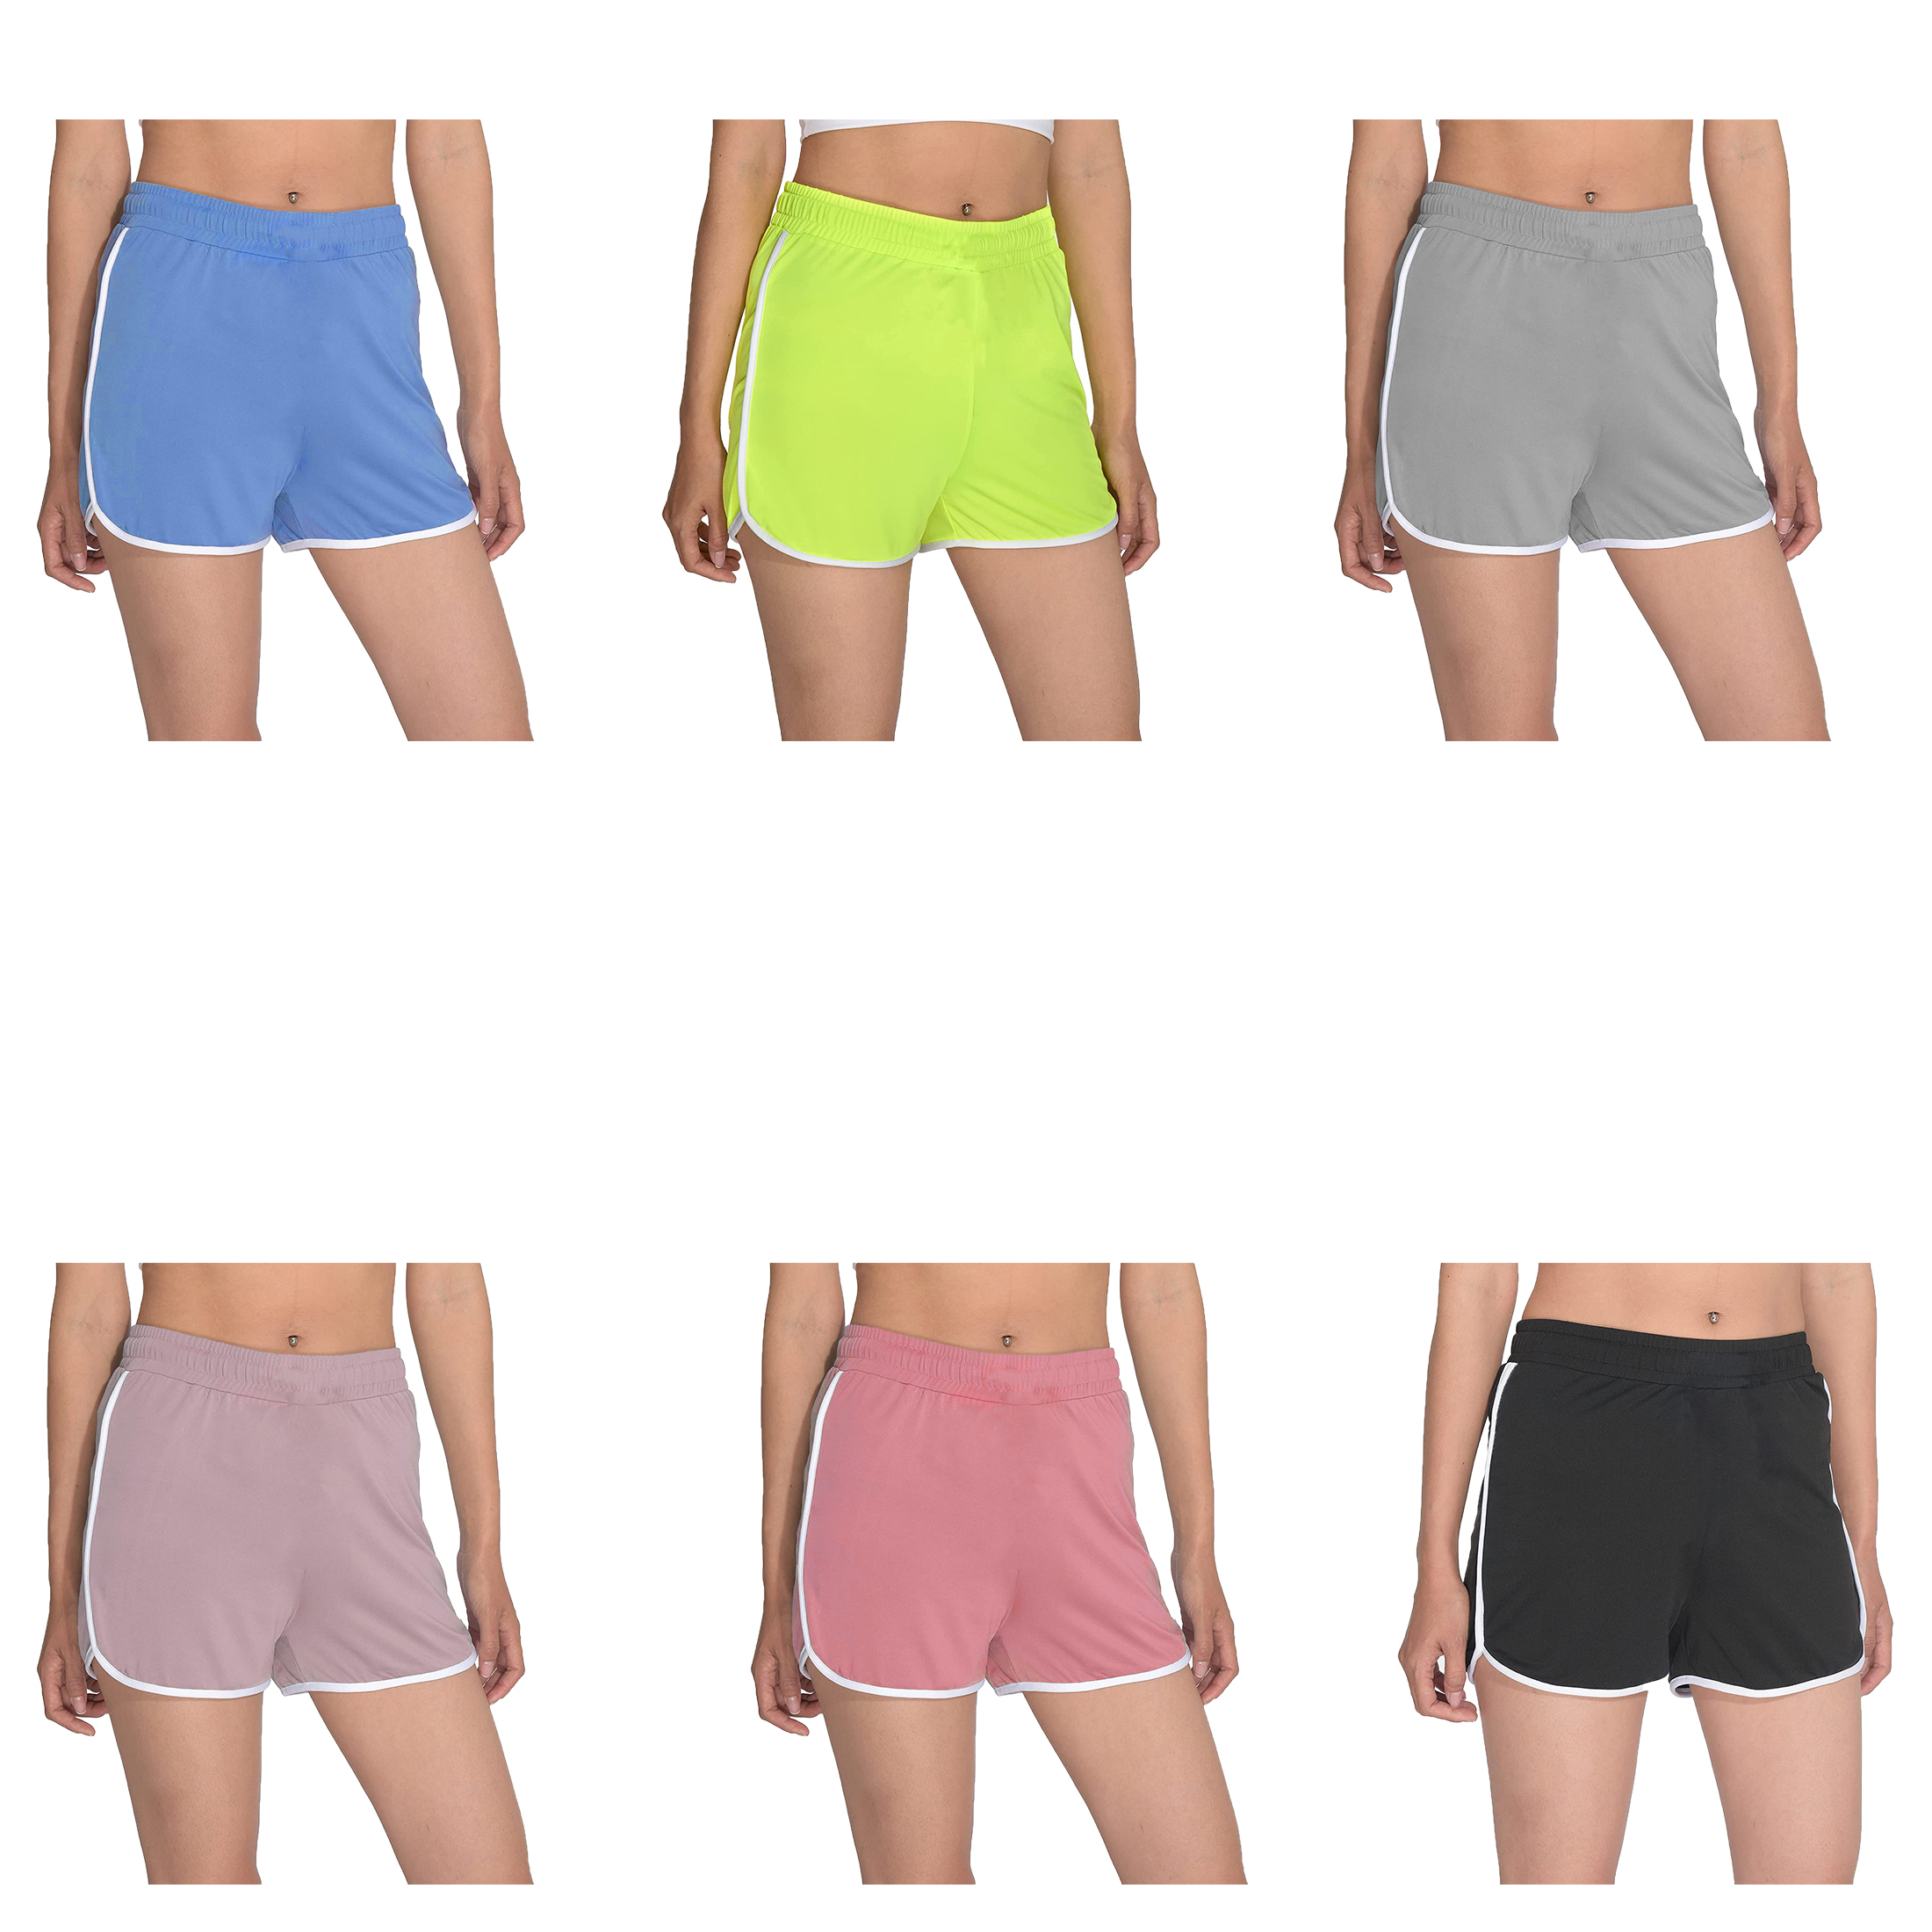 5-Pack Women's Dolphin Shorts Elastic Waist Soft Comfy Running Sporty Athletic Workout Pants - S